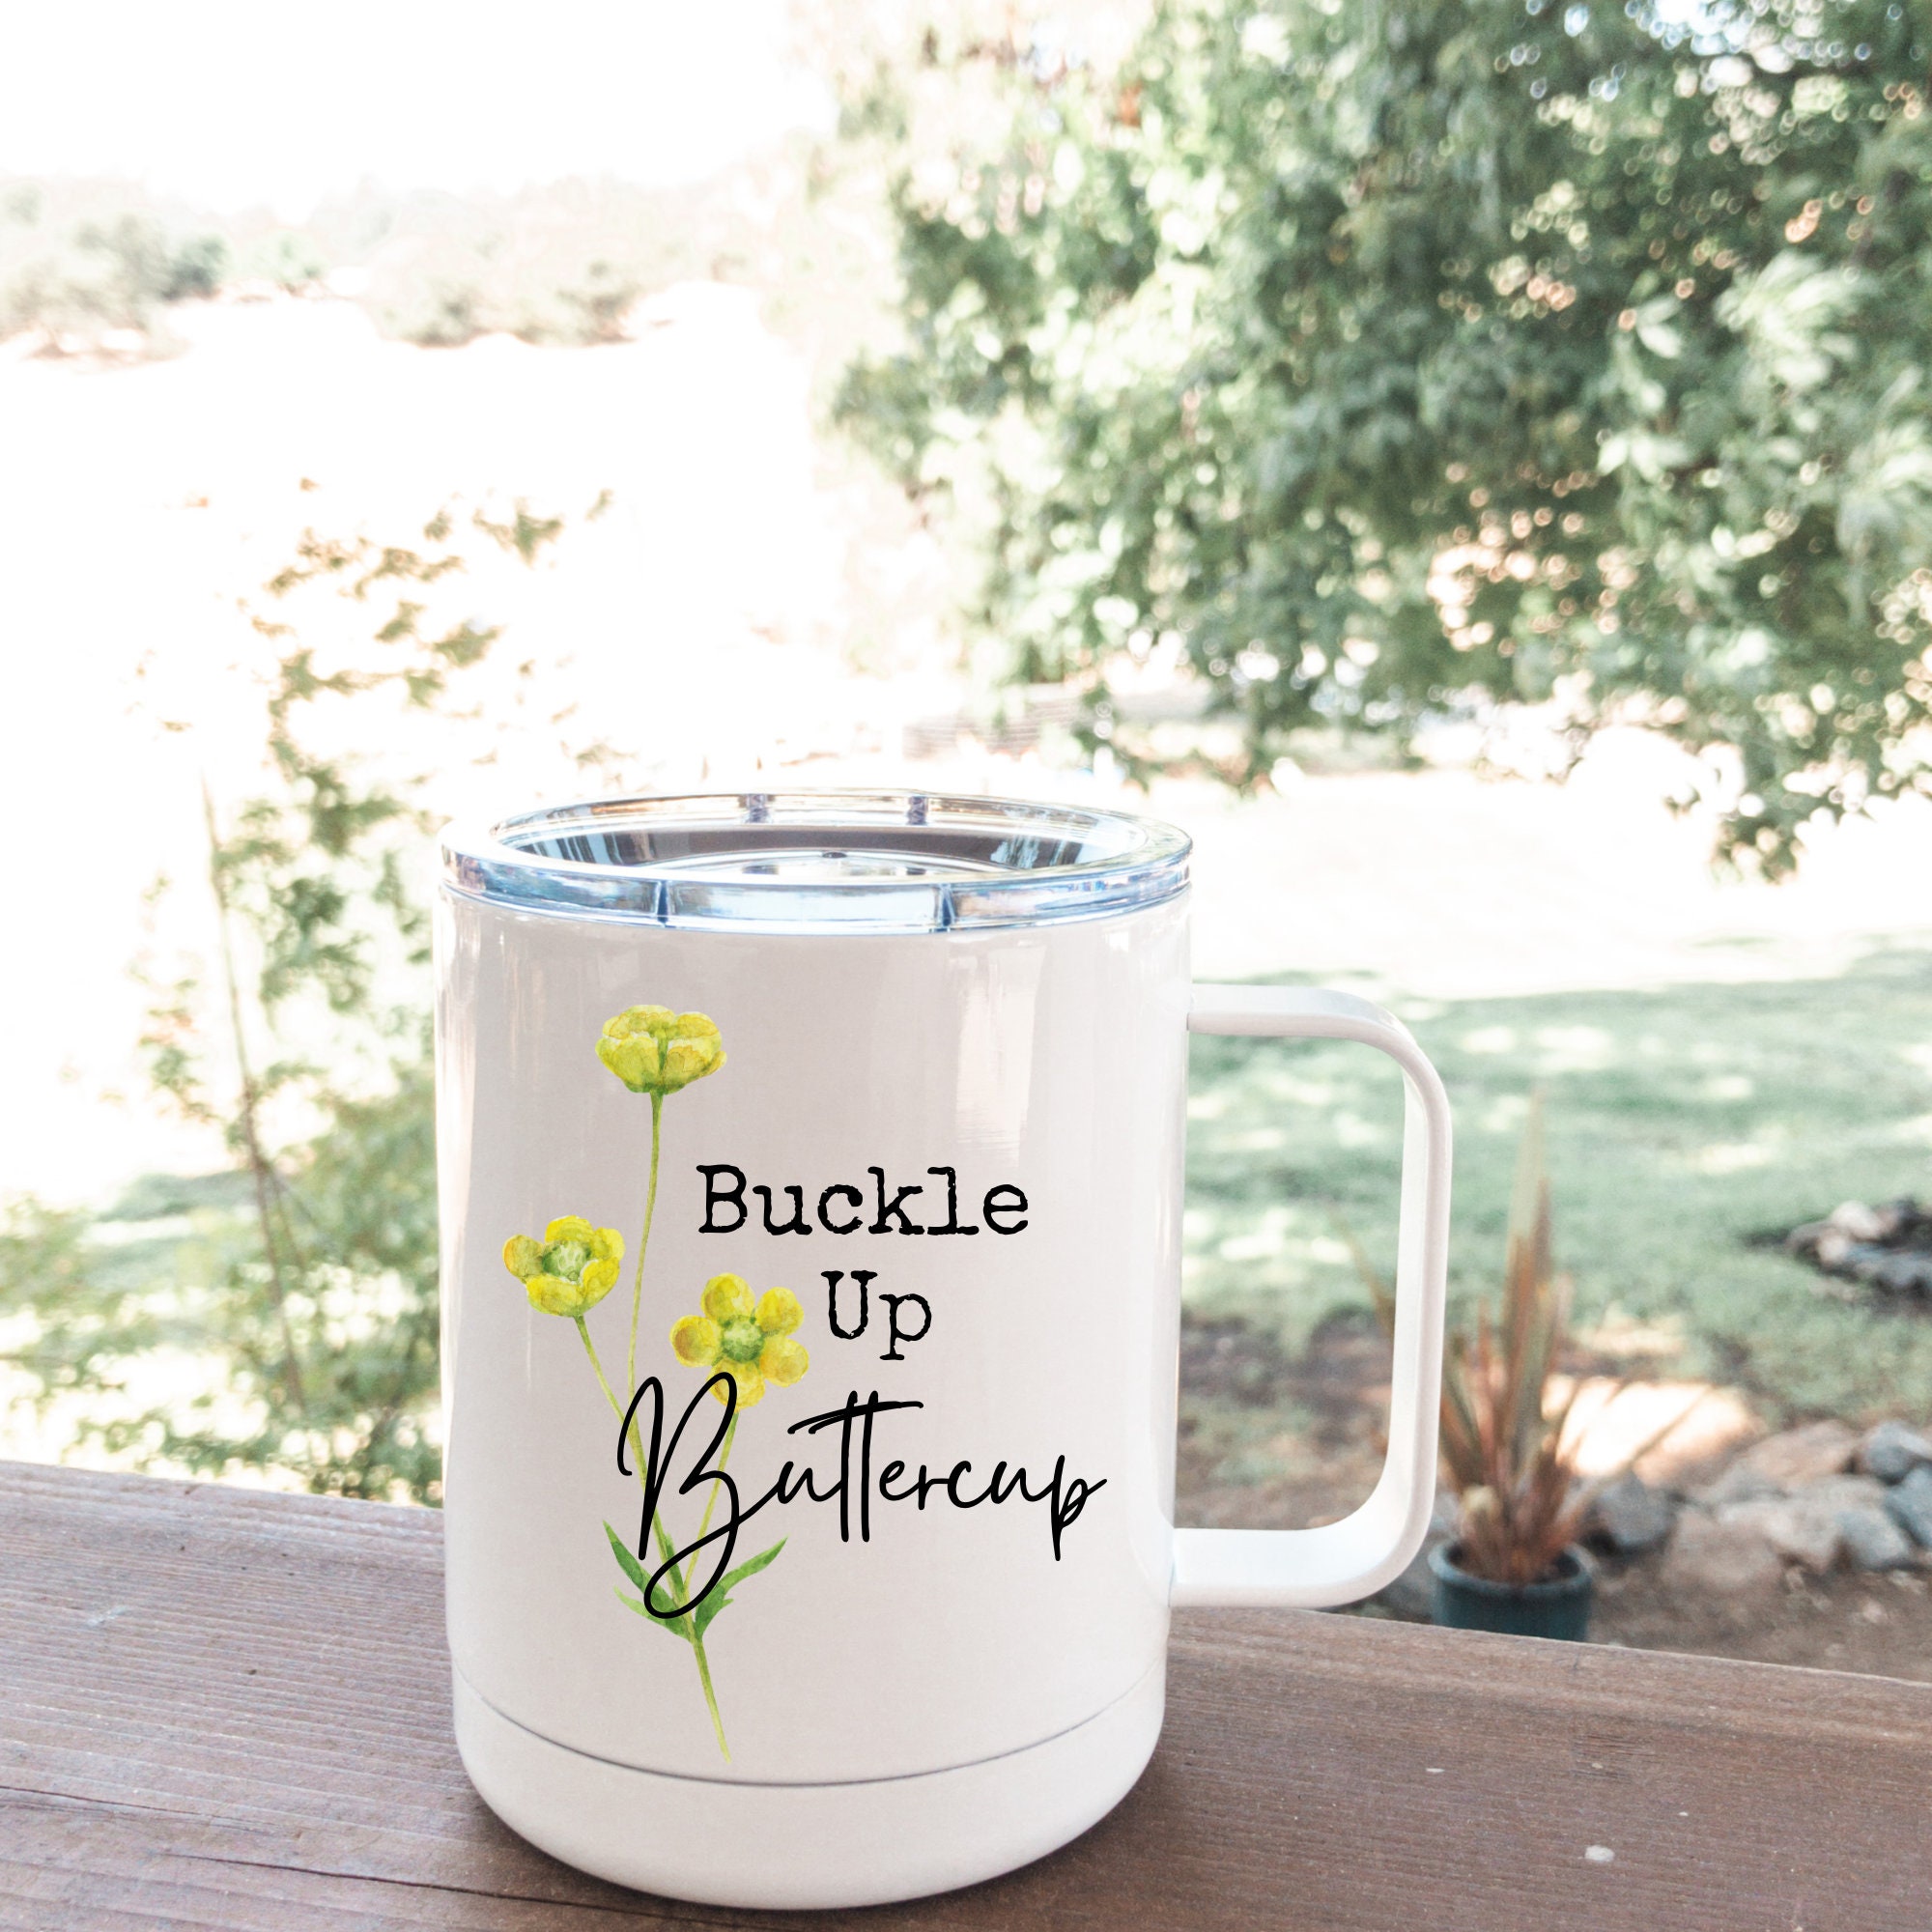 Buckle up Buttercup Coffee Mug / Insulated Cup With a Lid / 